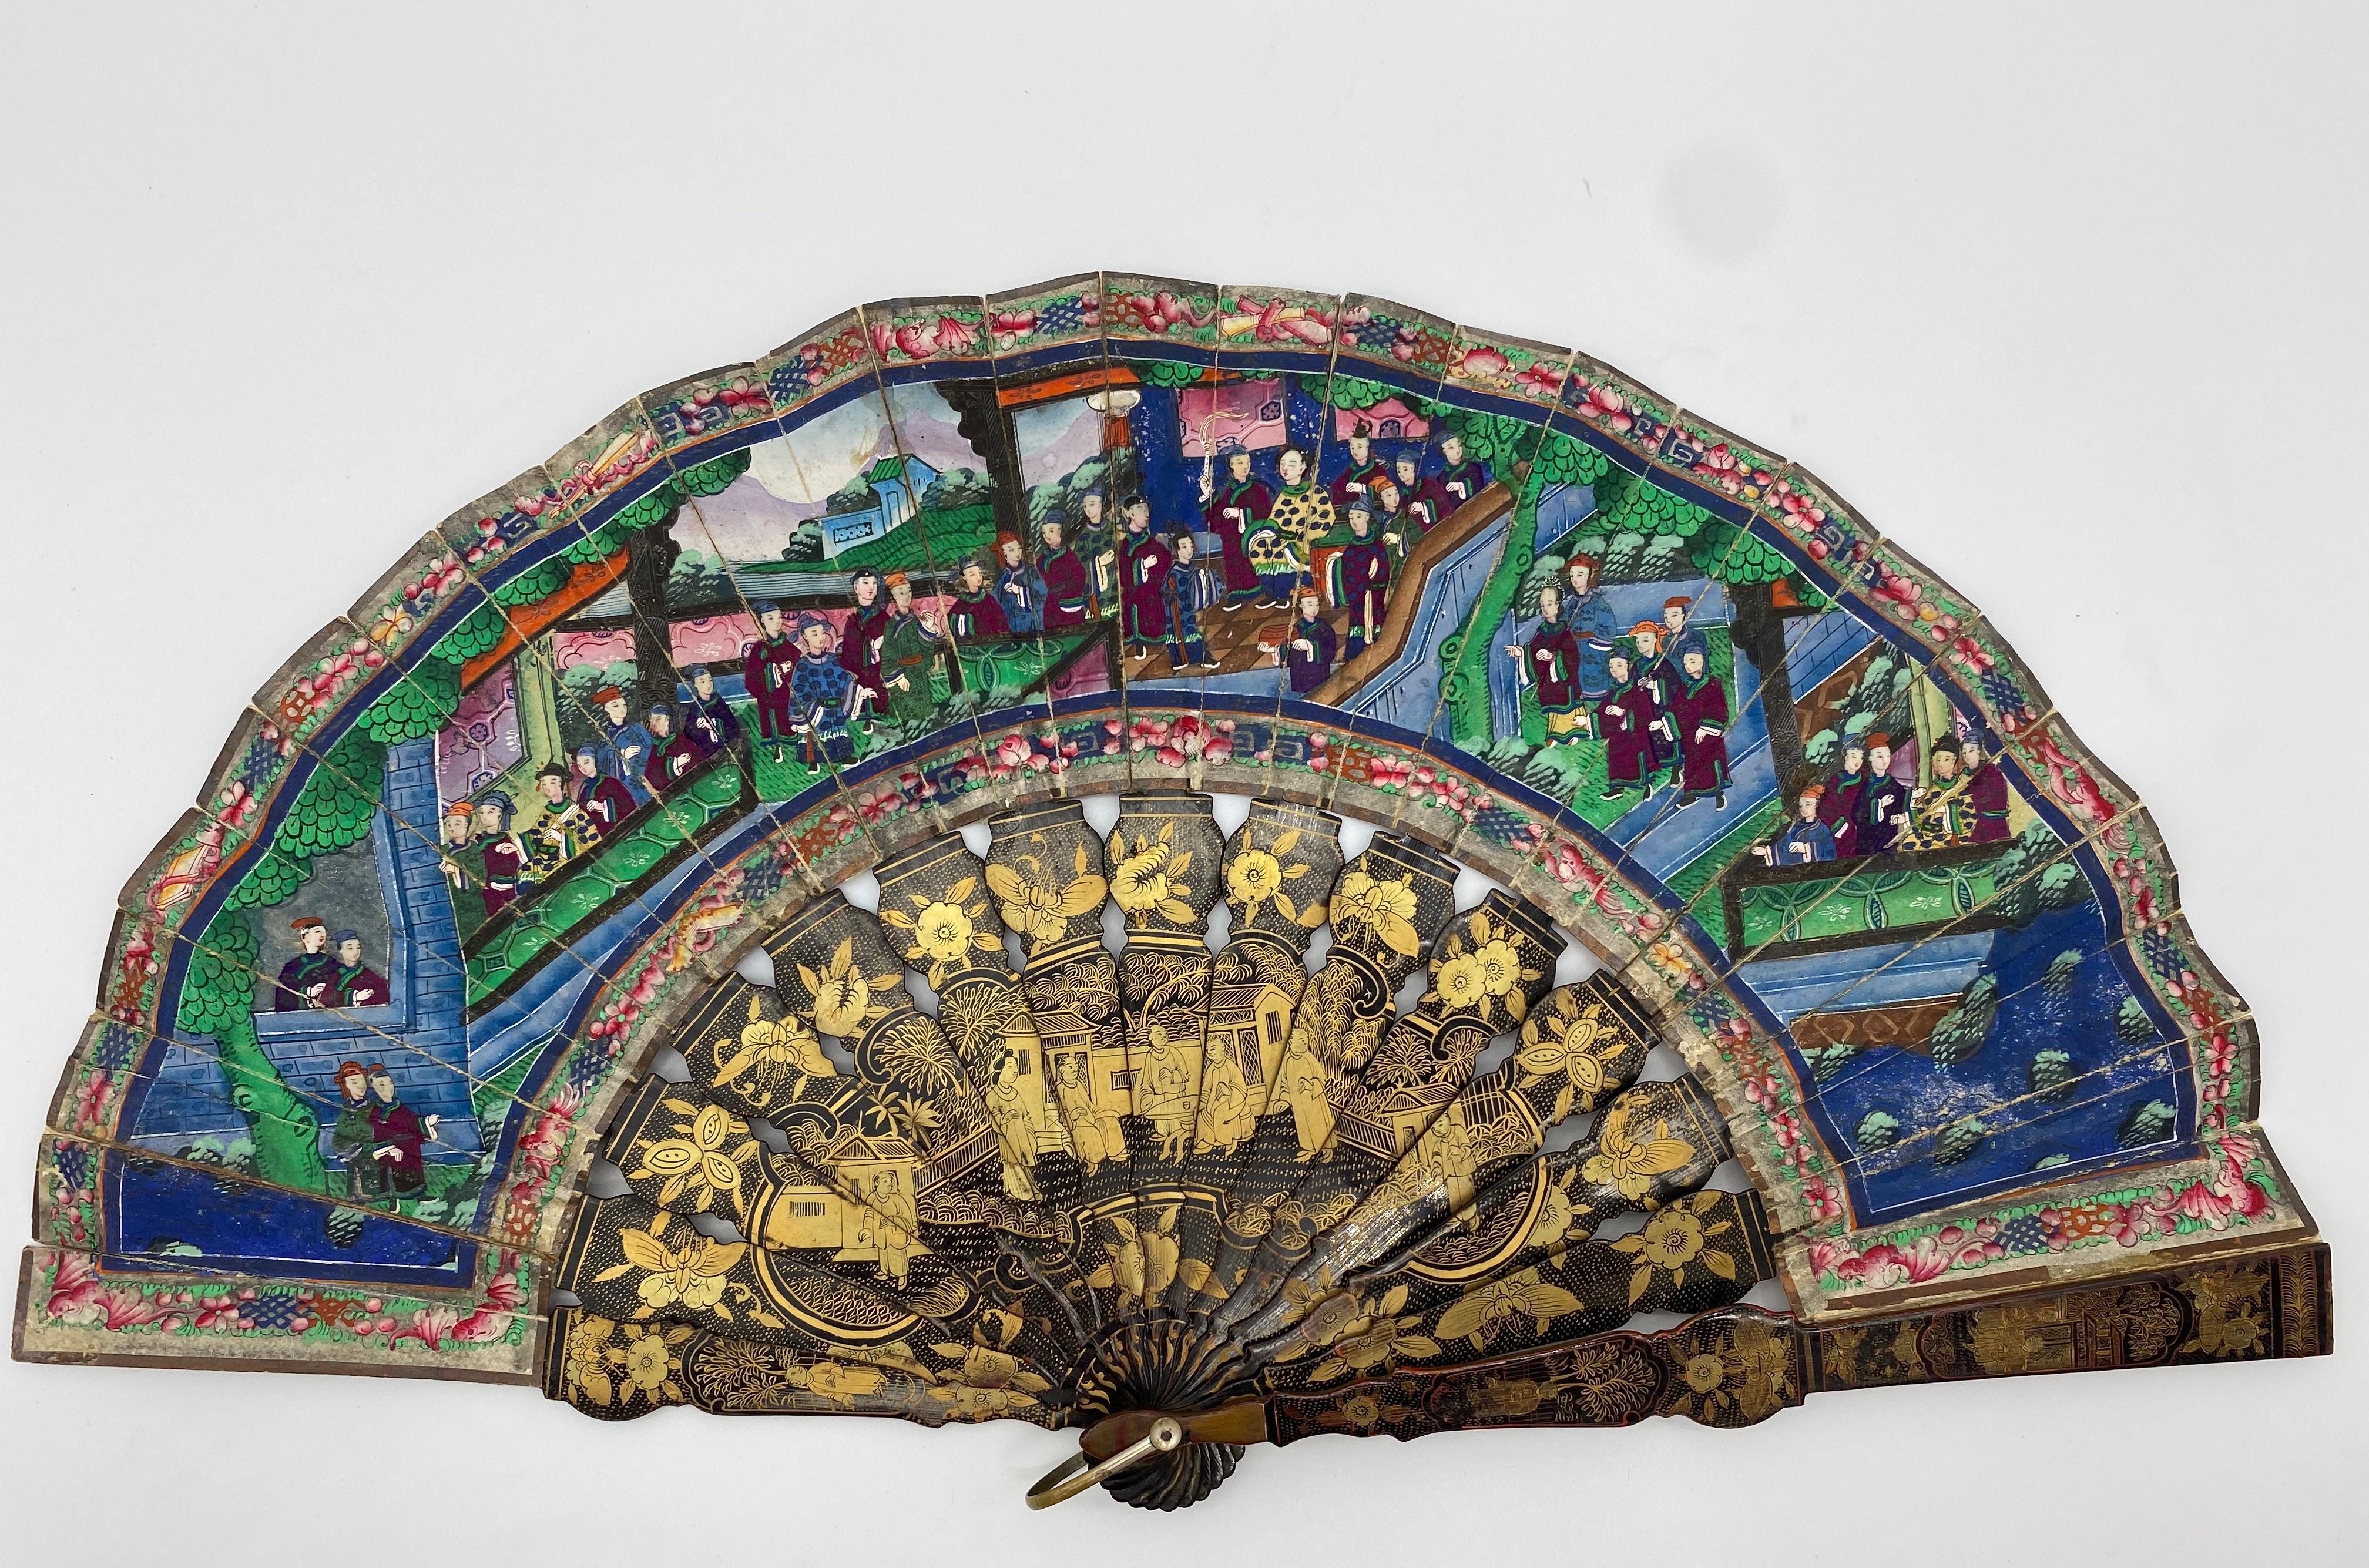 19th Century Chinese Gilt Lacquer Fan with Landscape 100 Faces 1